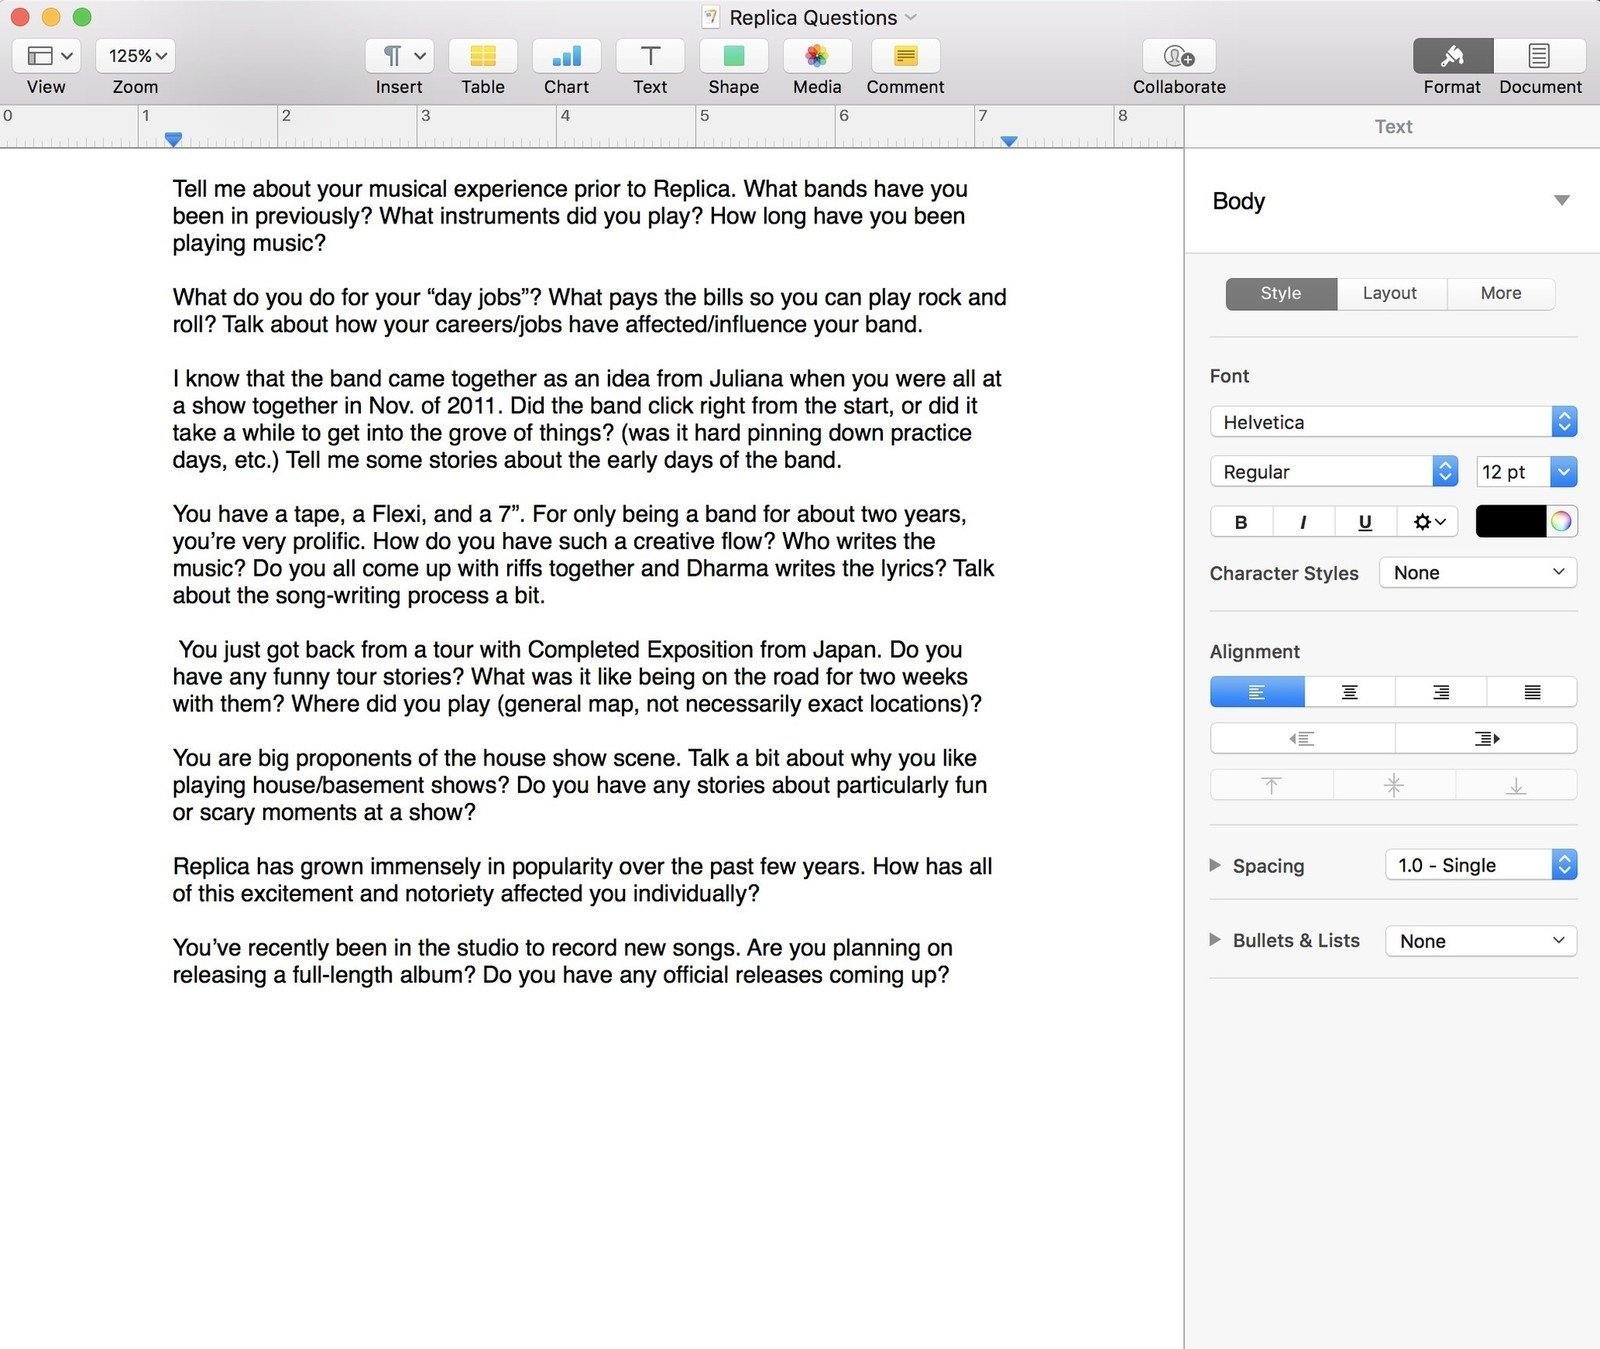 latest version of microsoft word for mac